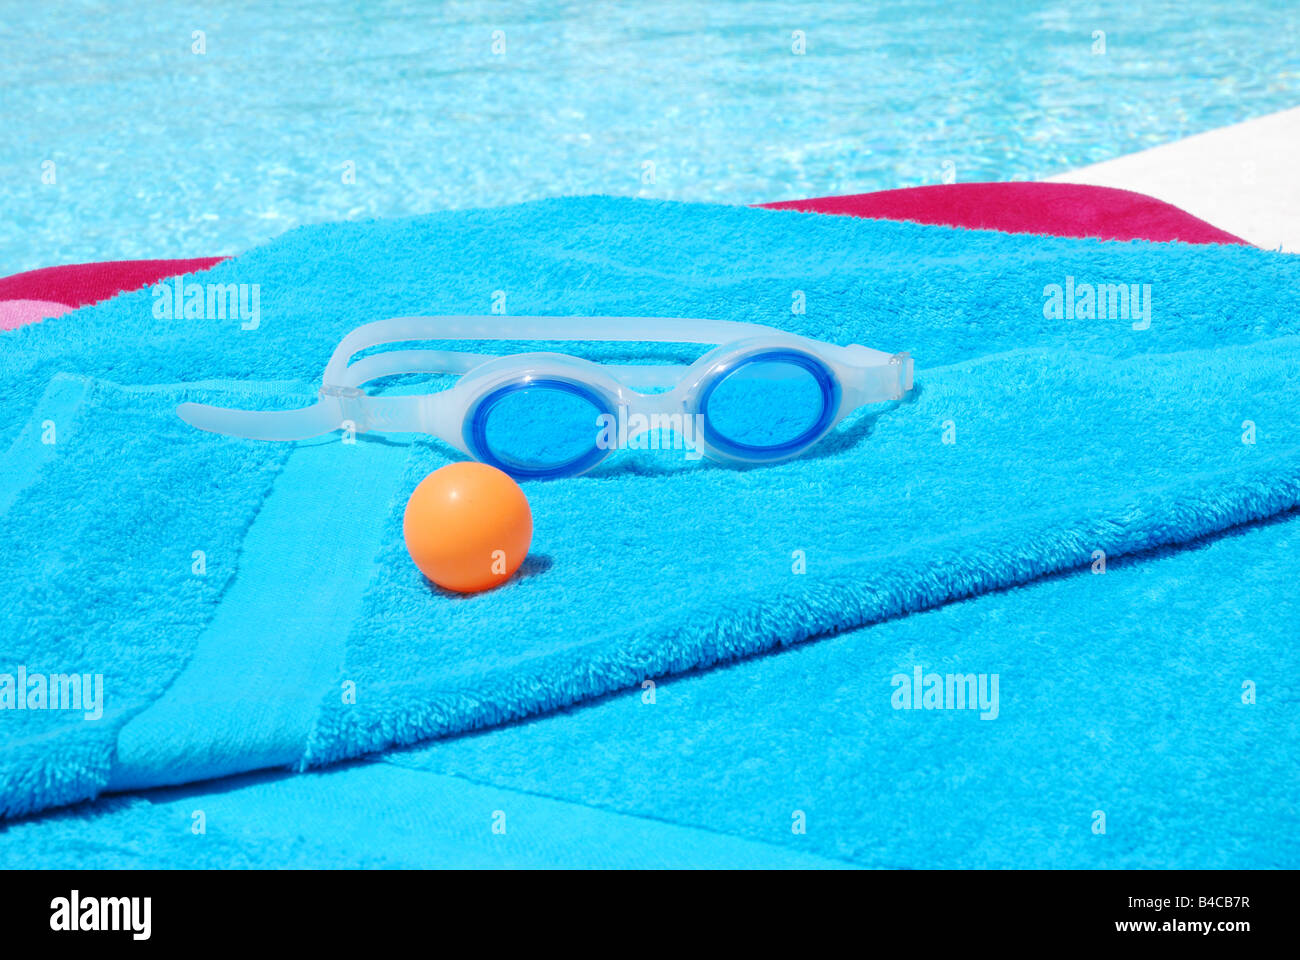 Goggles and orange ball on blue towel by the swimming pool. Stock Photo